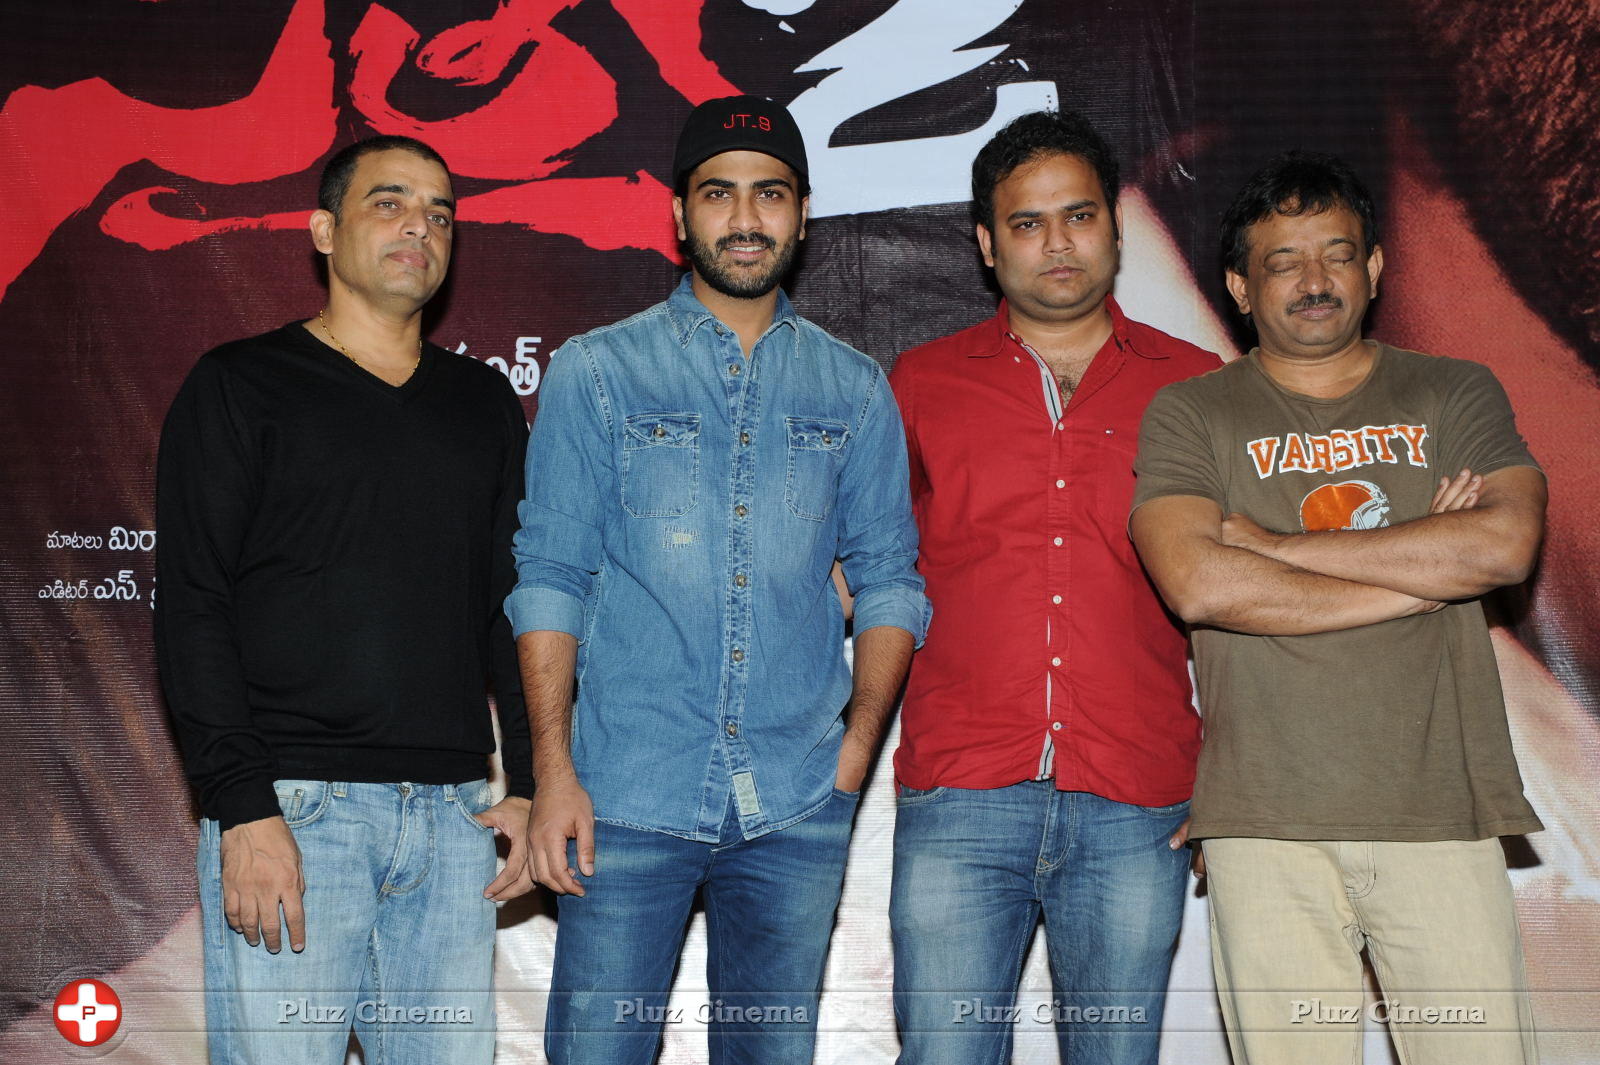 Satya 2 Movie Press Meet Pictures | Picture 627025